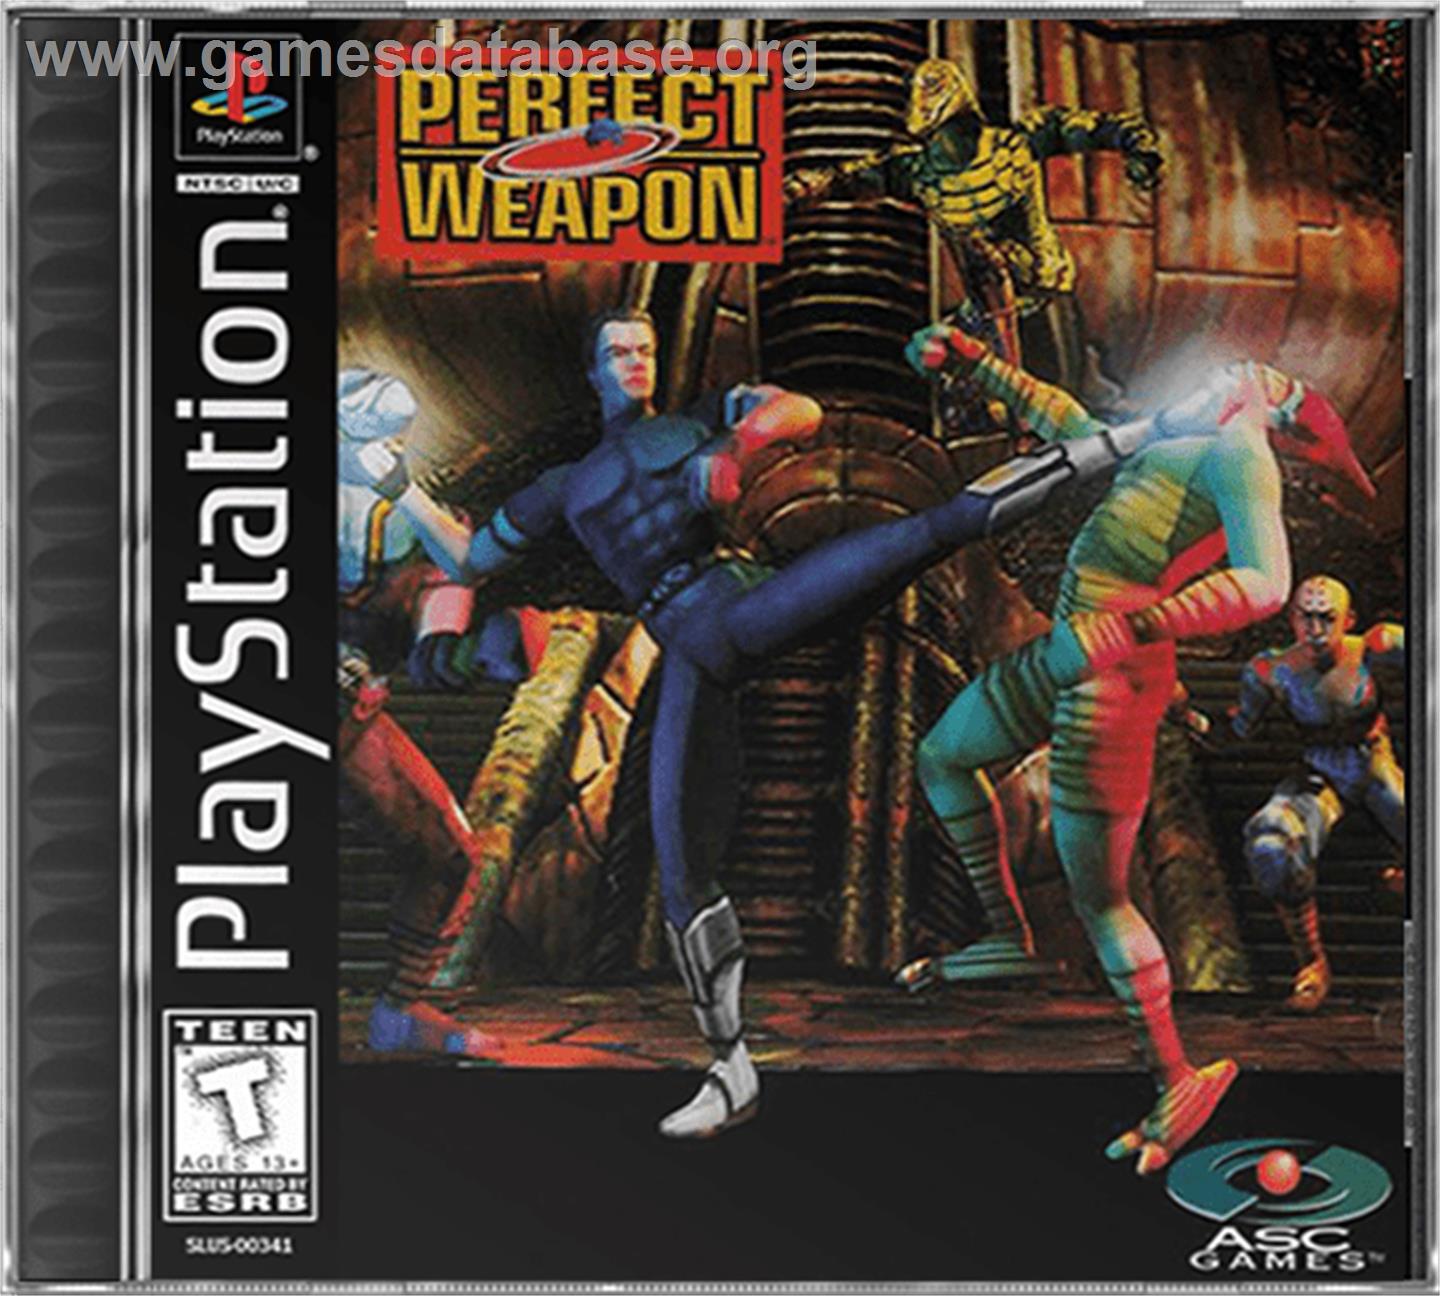 Perfect Weapon - Sony Playstation - Artwork - Box